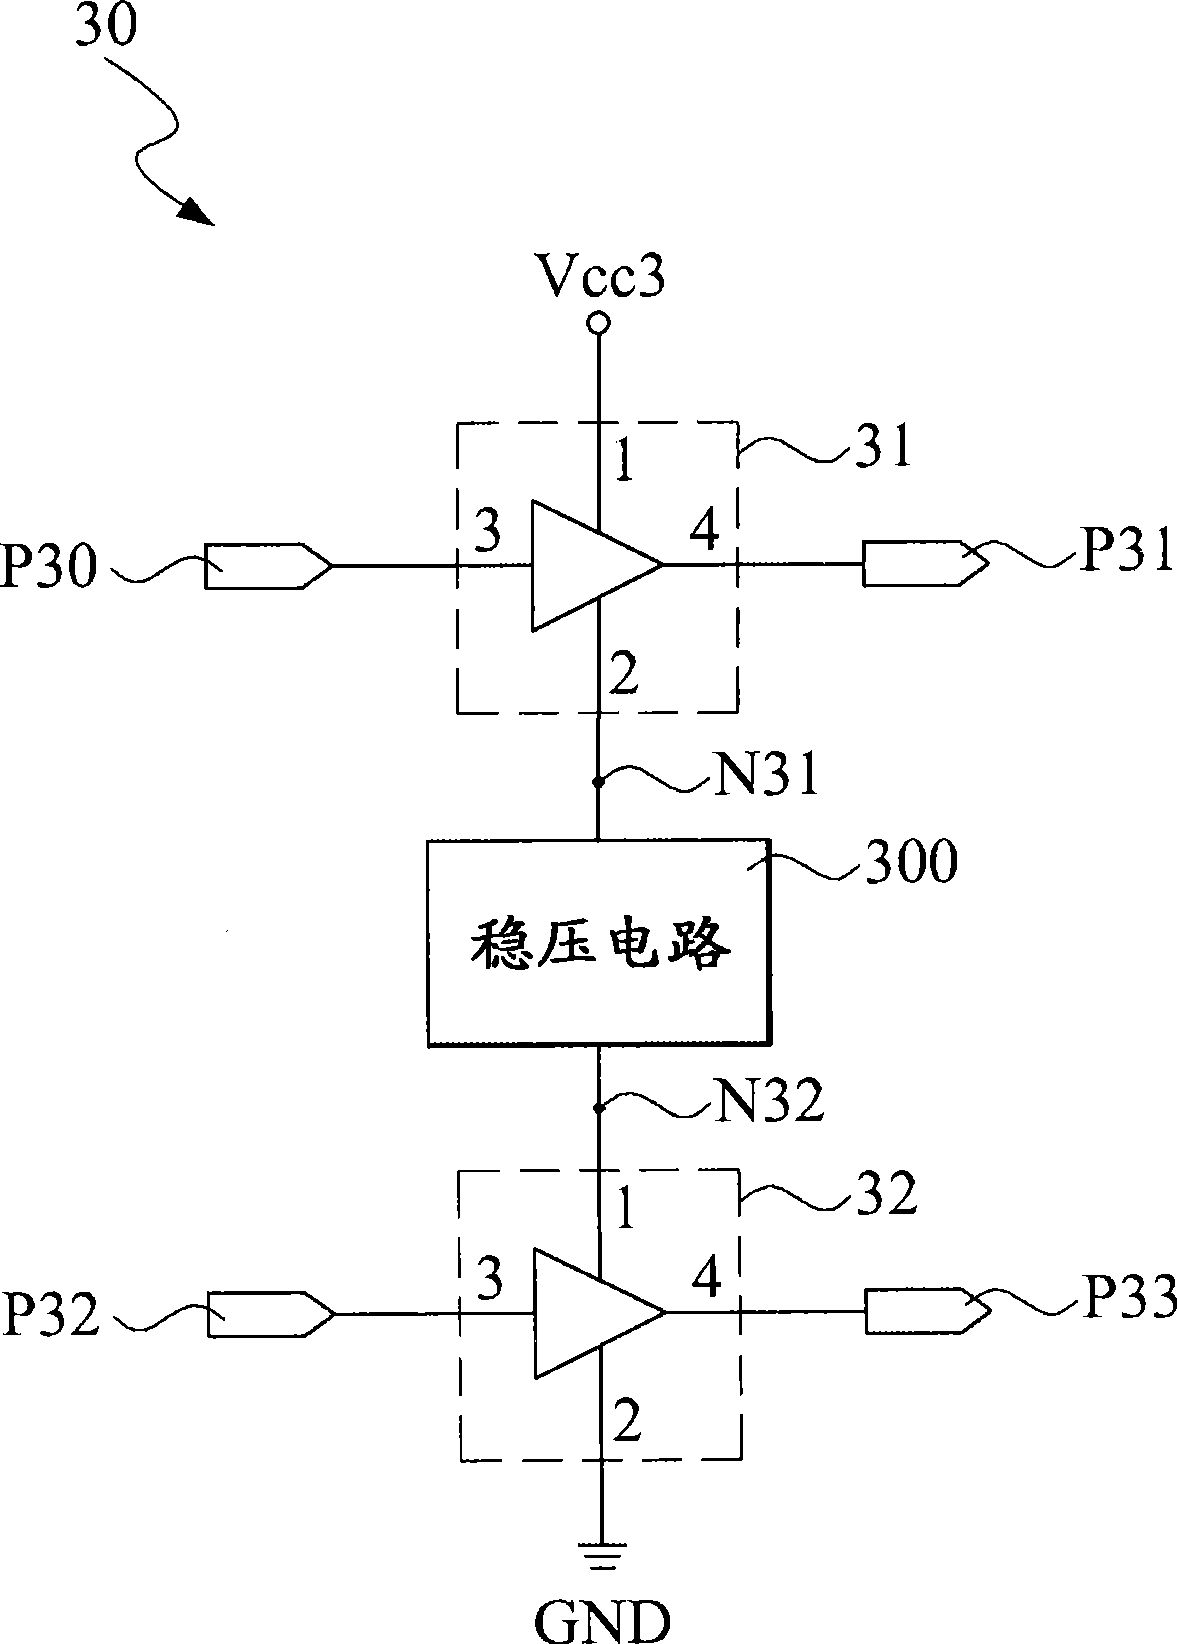 Series connection electricity utilization signal processing circuit and electronic device